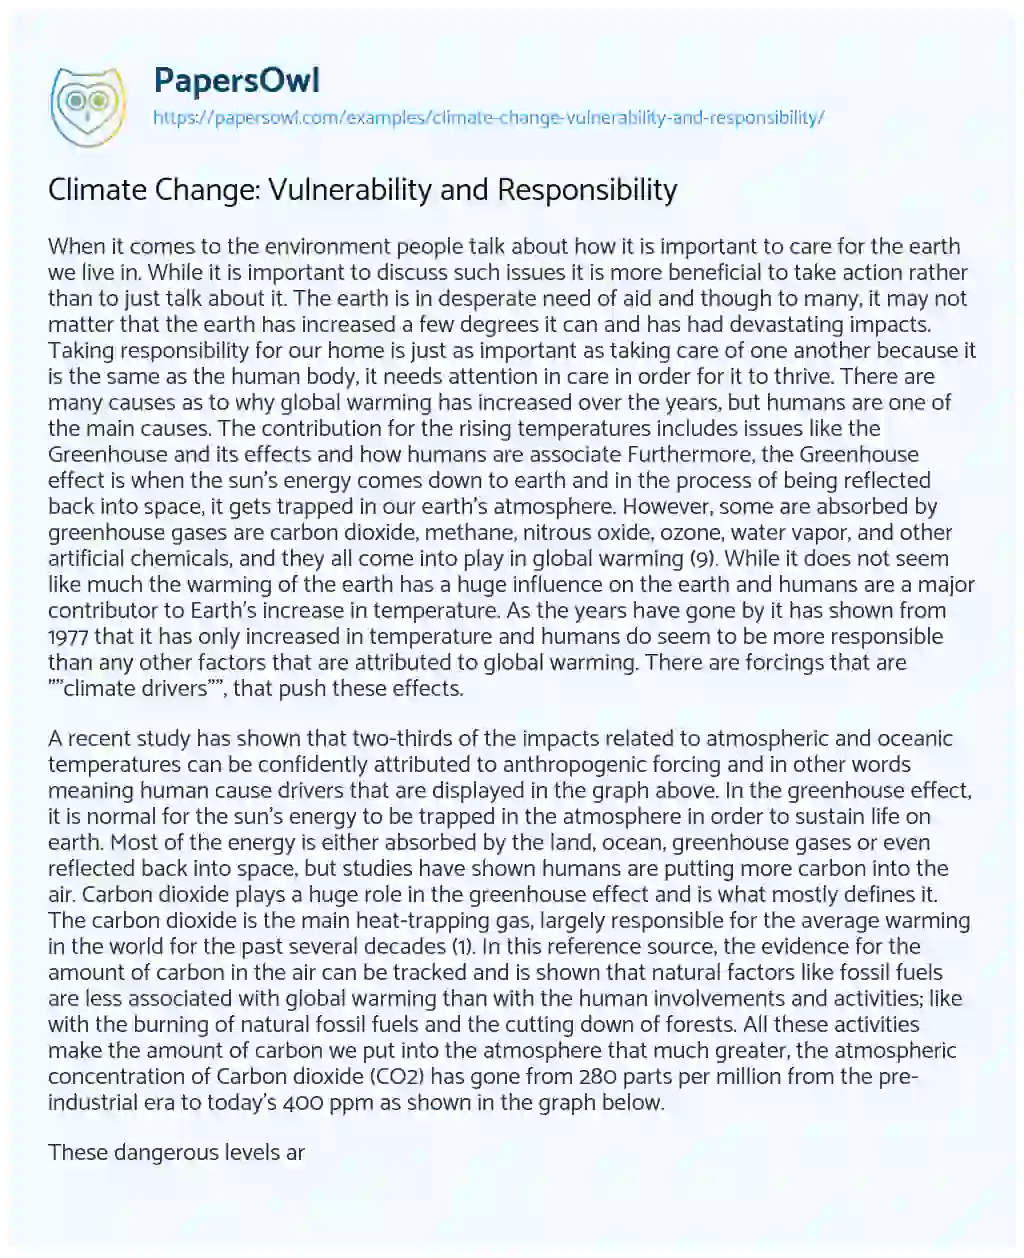 Essay on Climate Change: Vulnerability and Responsibility